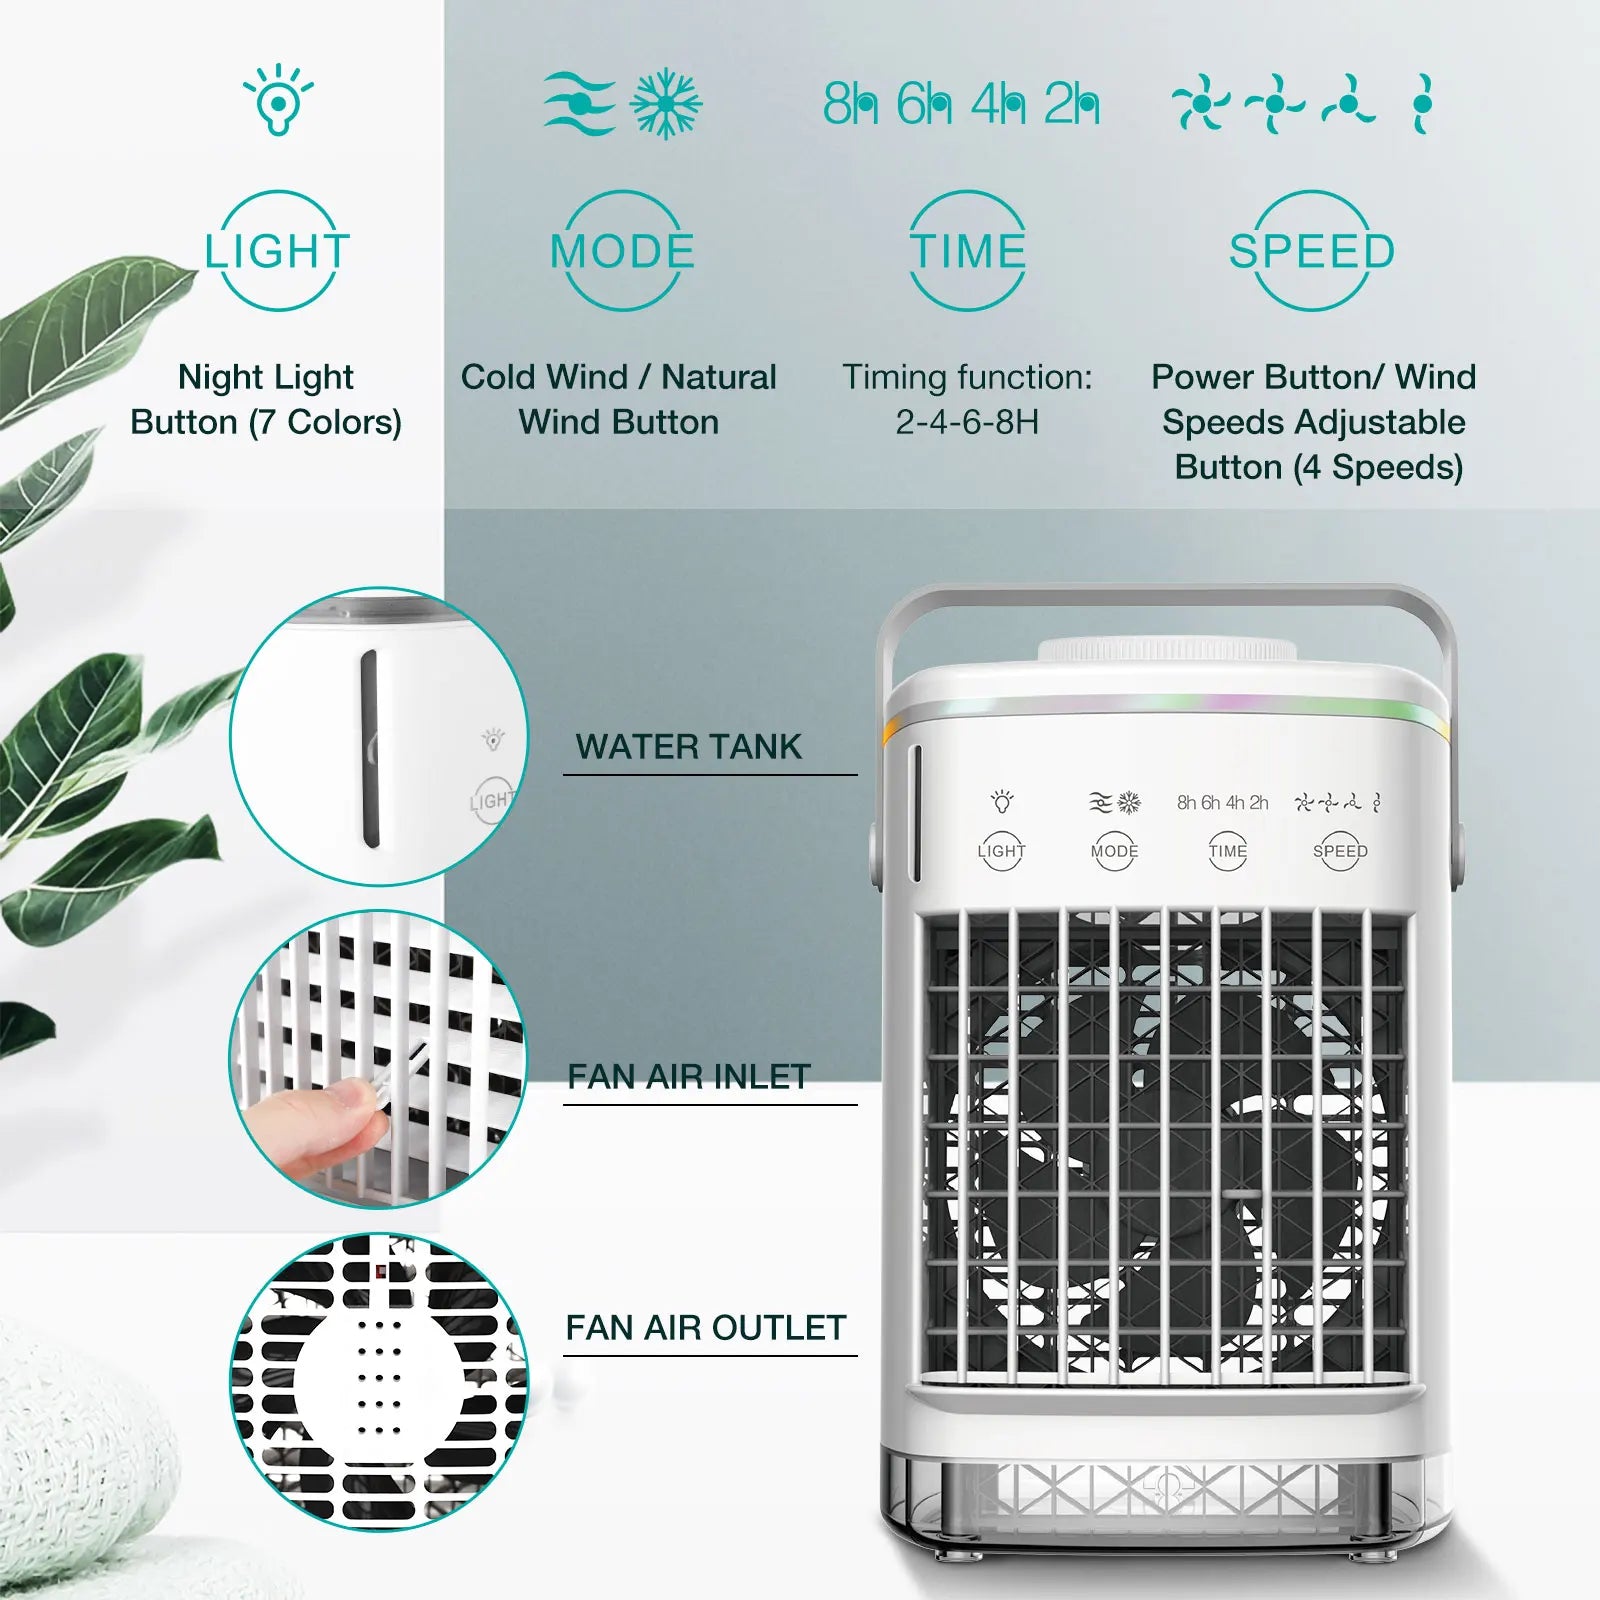 Portable Cold Air Conditioner Evaporative Air Cooler Mini Usb Table Fan Desktop Air Conditioning Fan Humidifier for Home Room